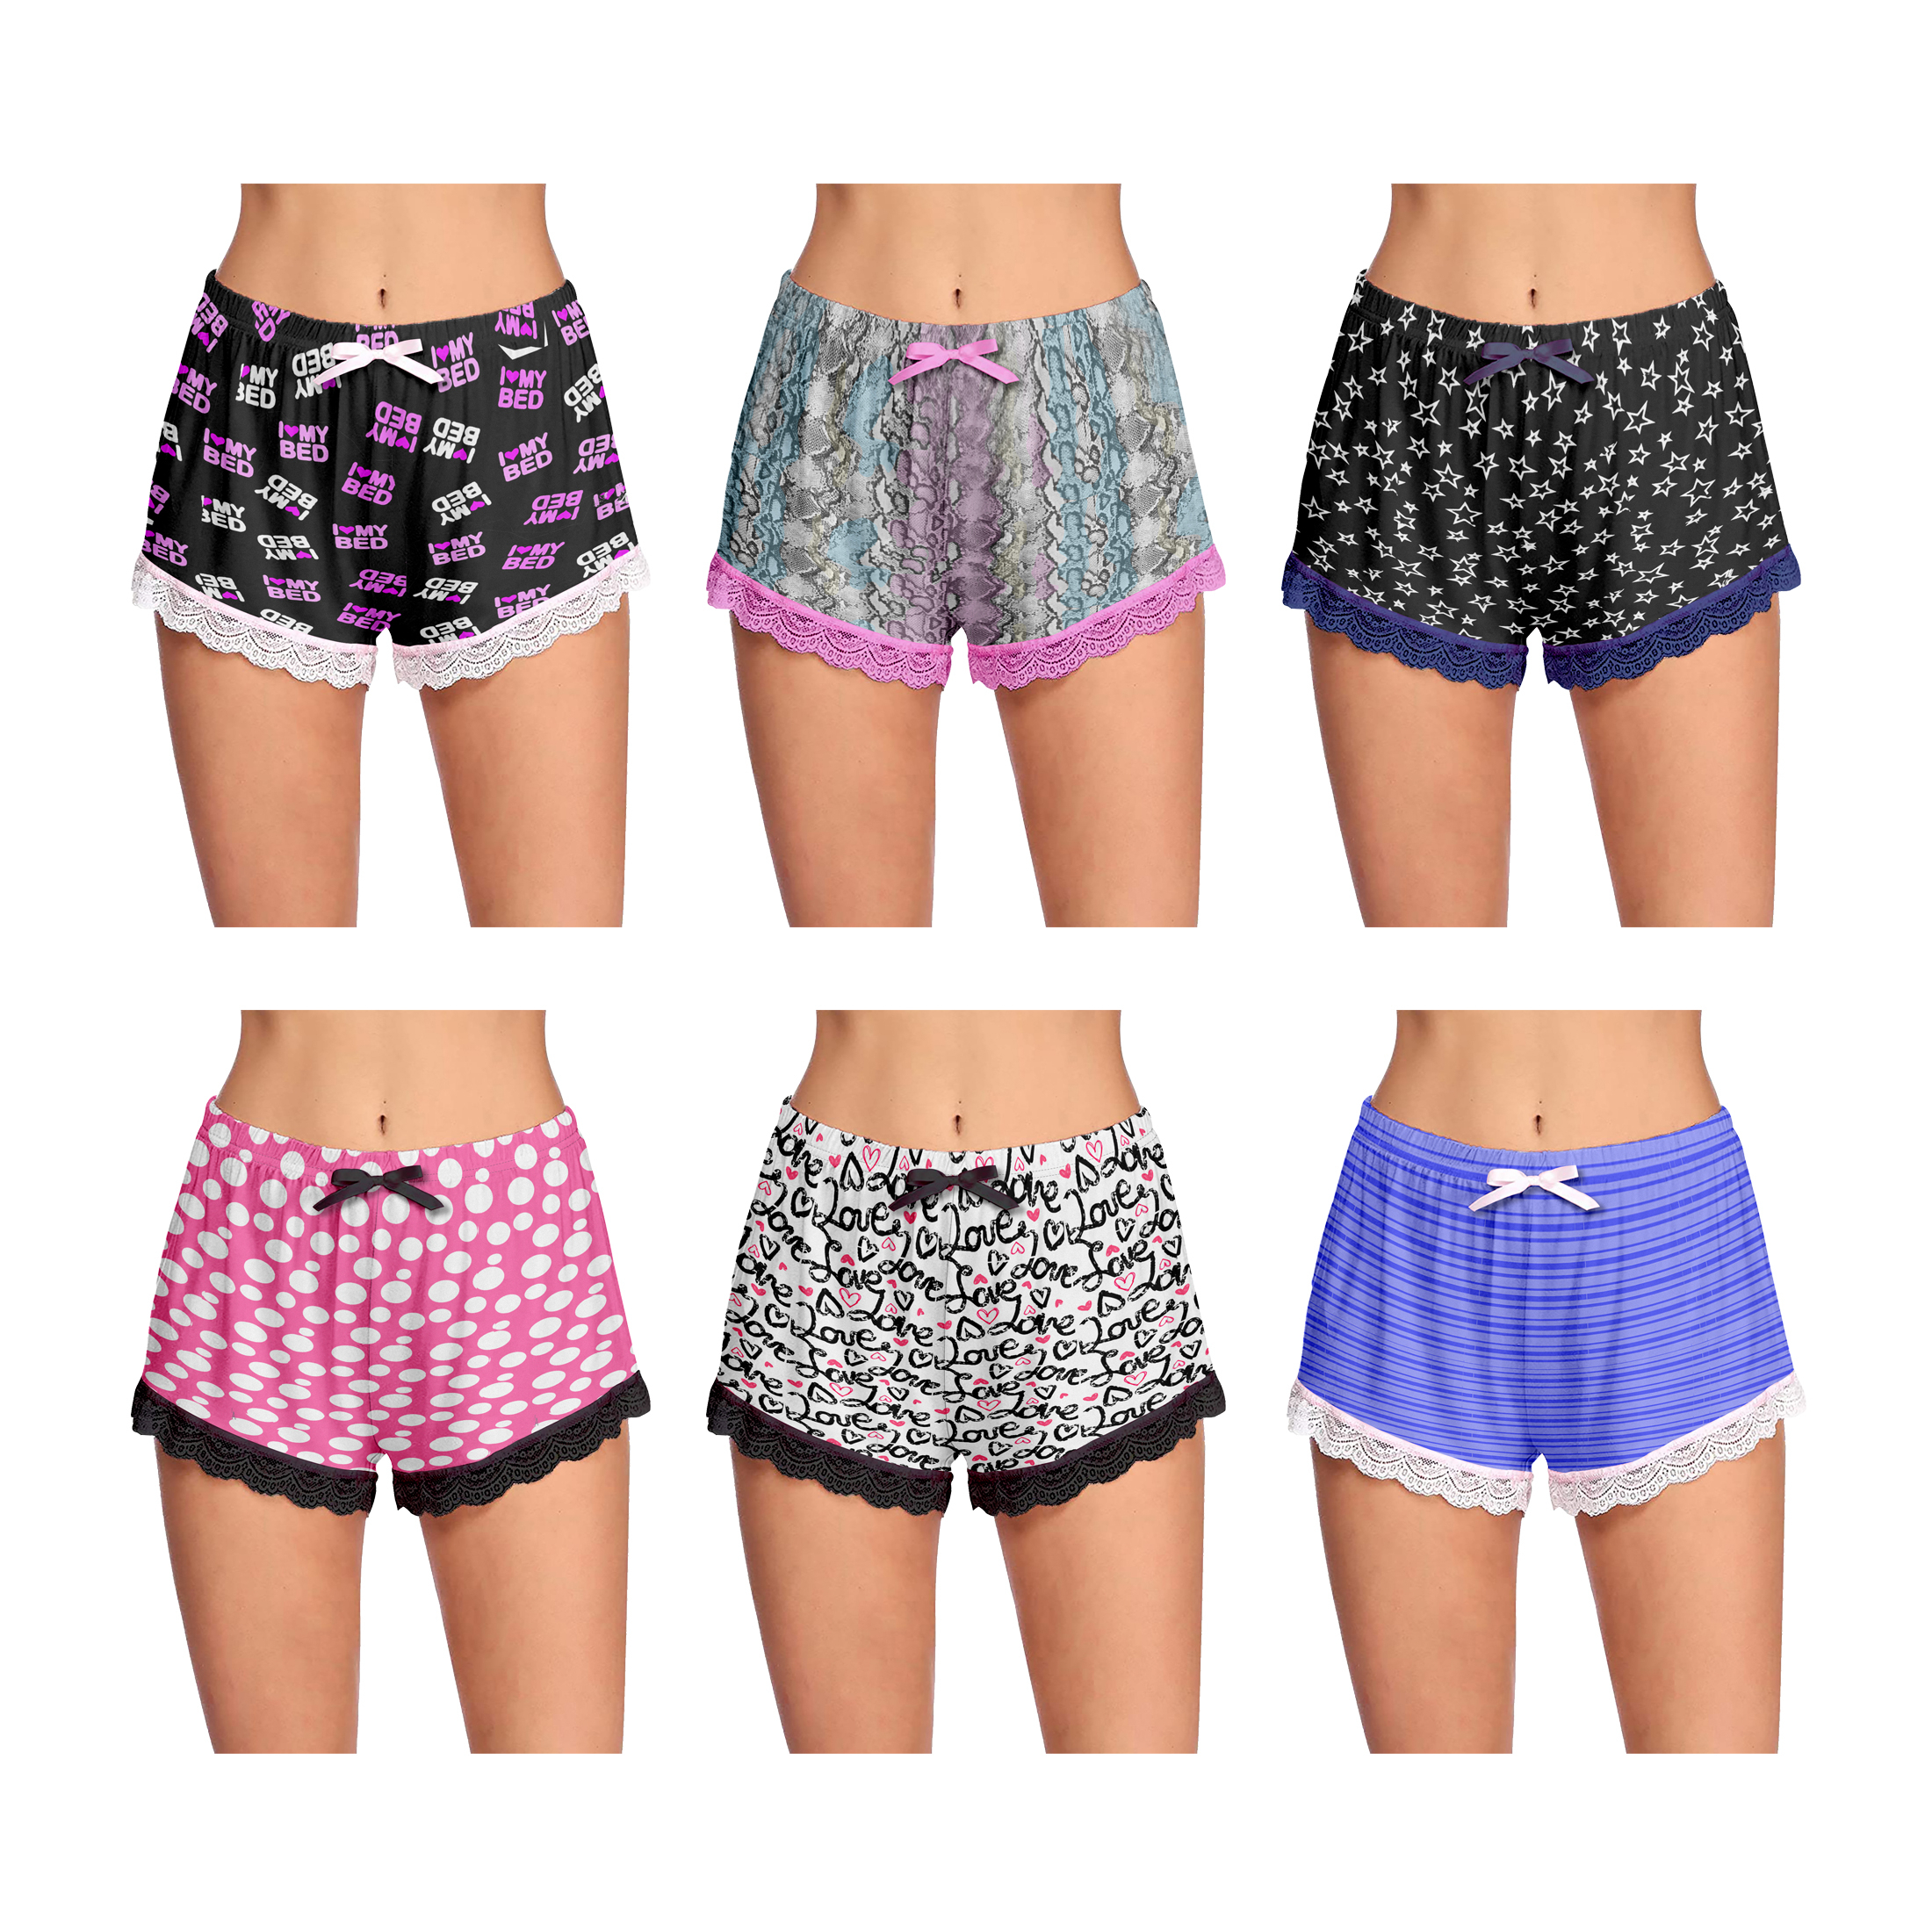 6-Pack Women's Casual Pajama Shorts Stretchy Laced Hem Relaxed Fit Yoga Printed Ladies Bottom - S